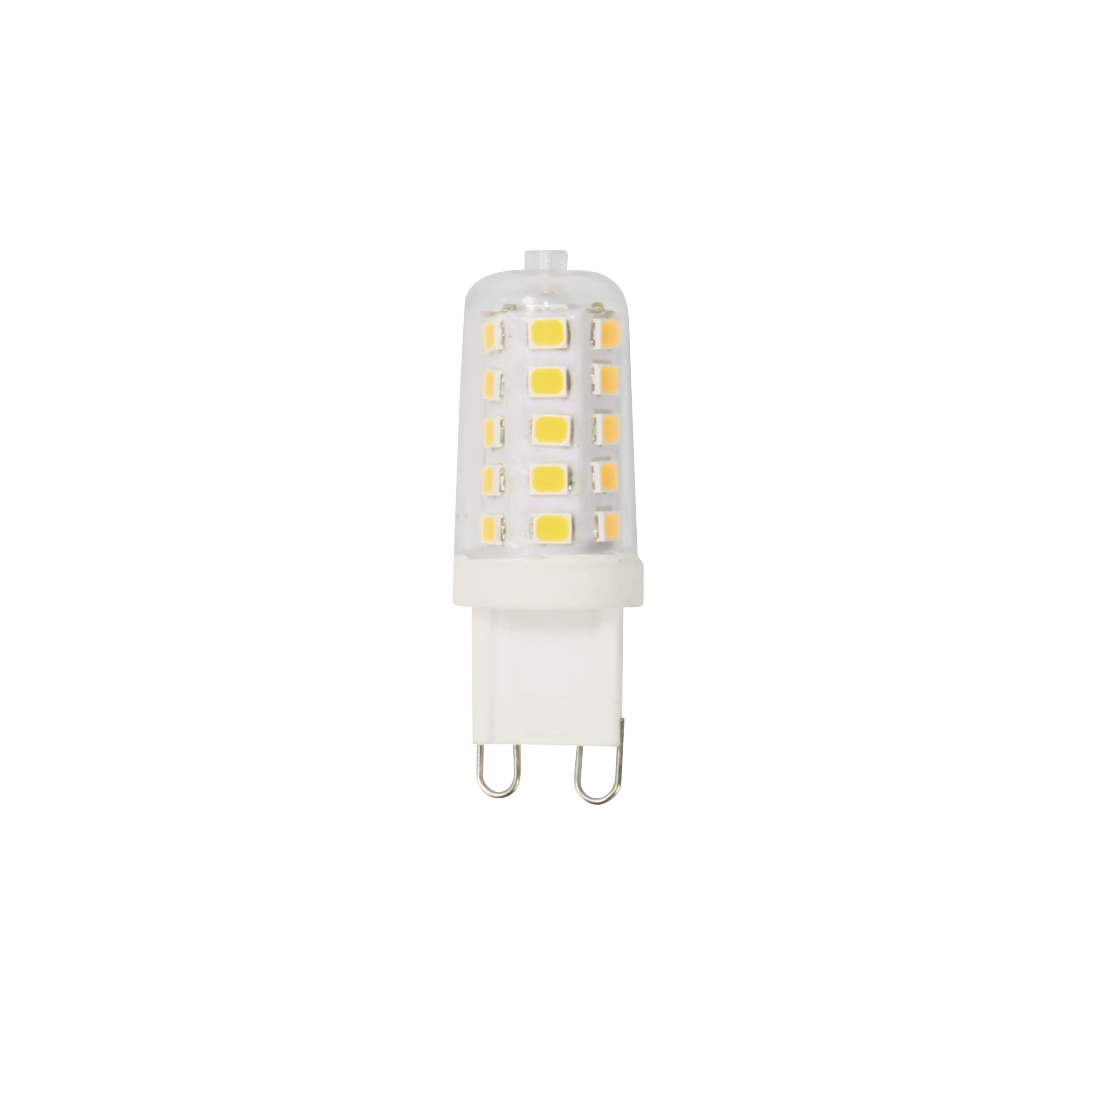 abx High-Res Image - Xavax, LED Bulb, G9, 300 lm, Replaces 28 W, Capsule, warm white